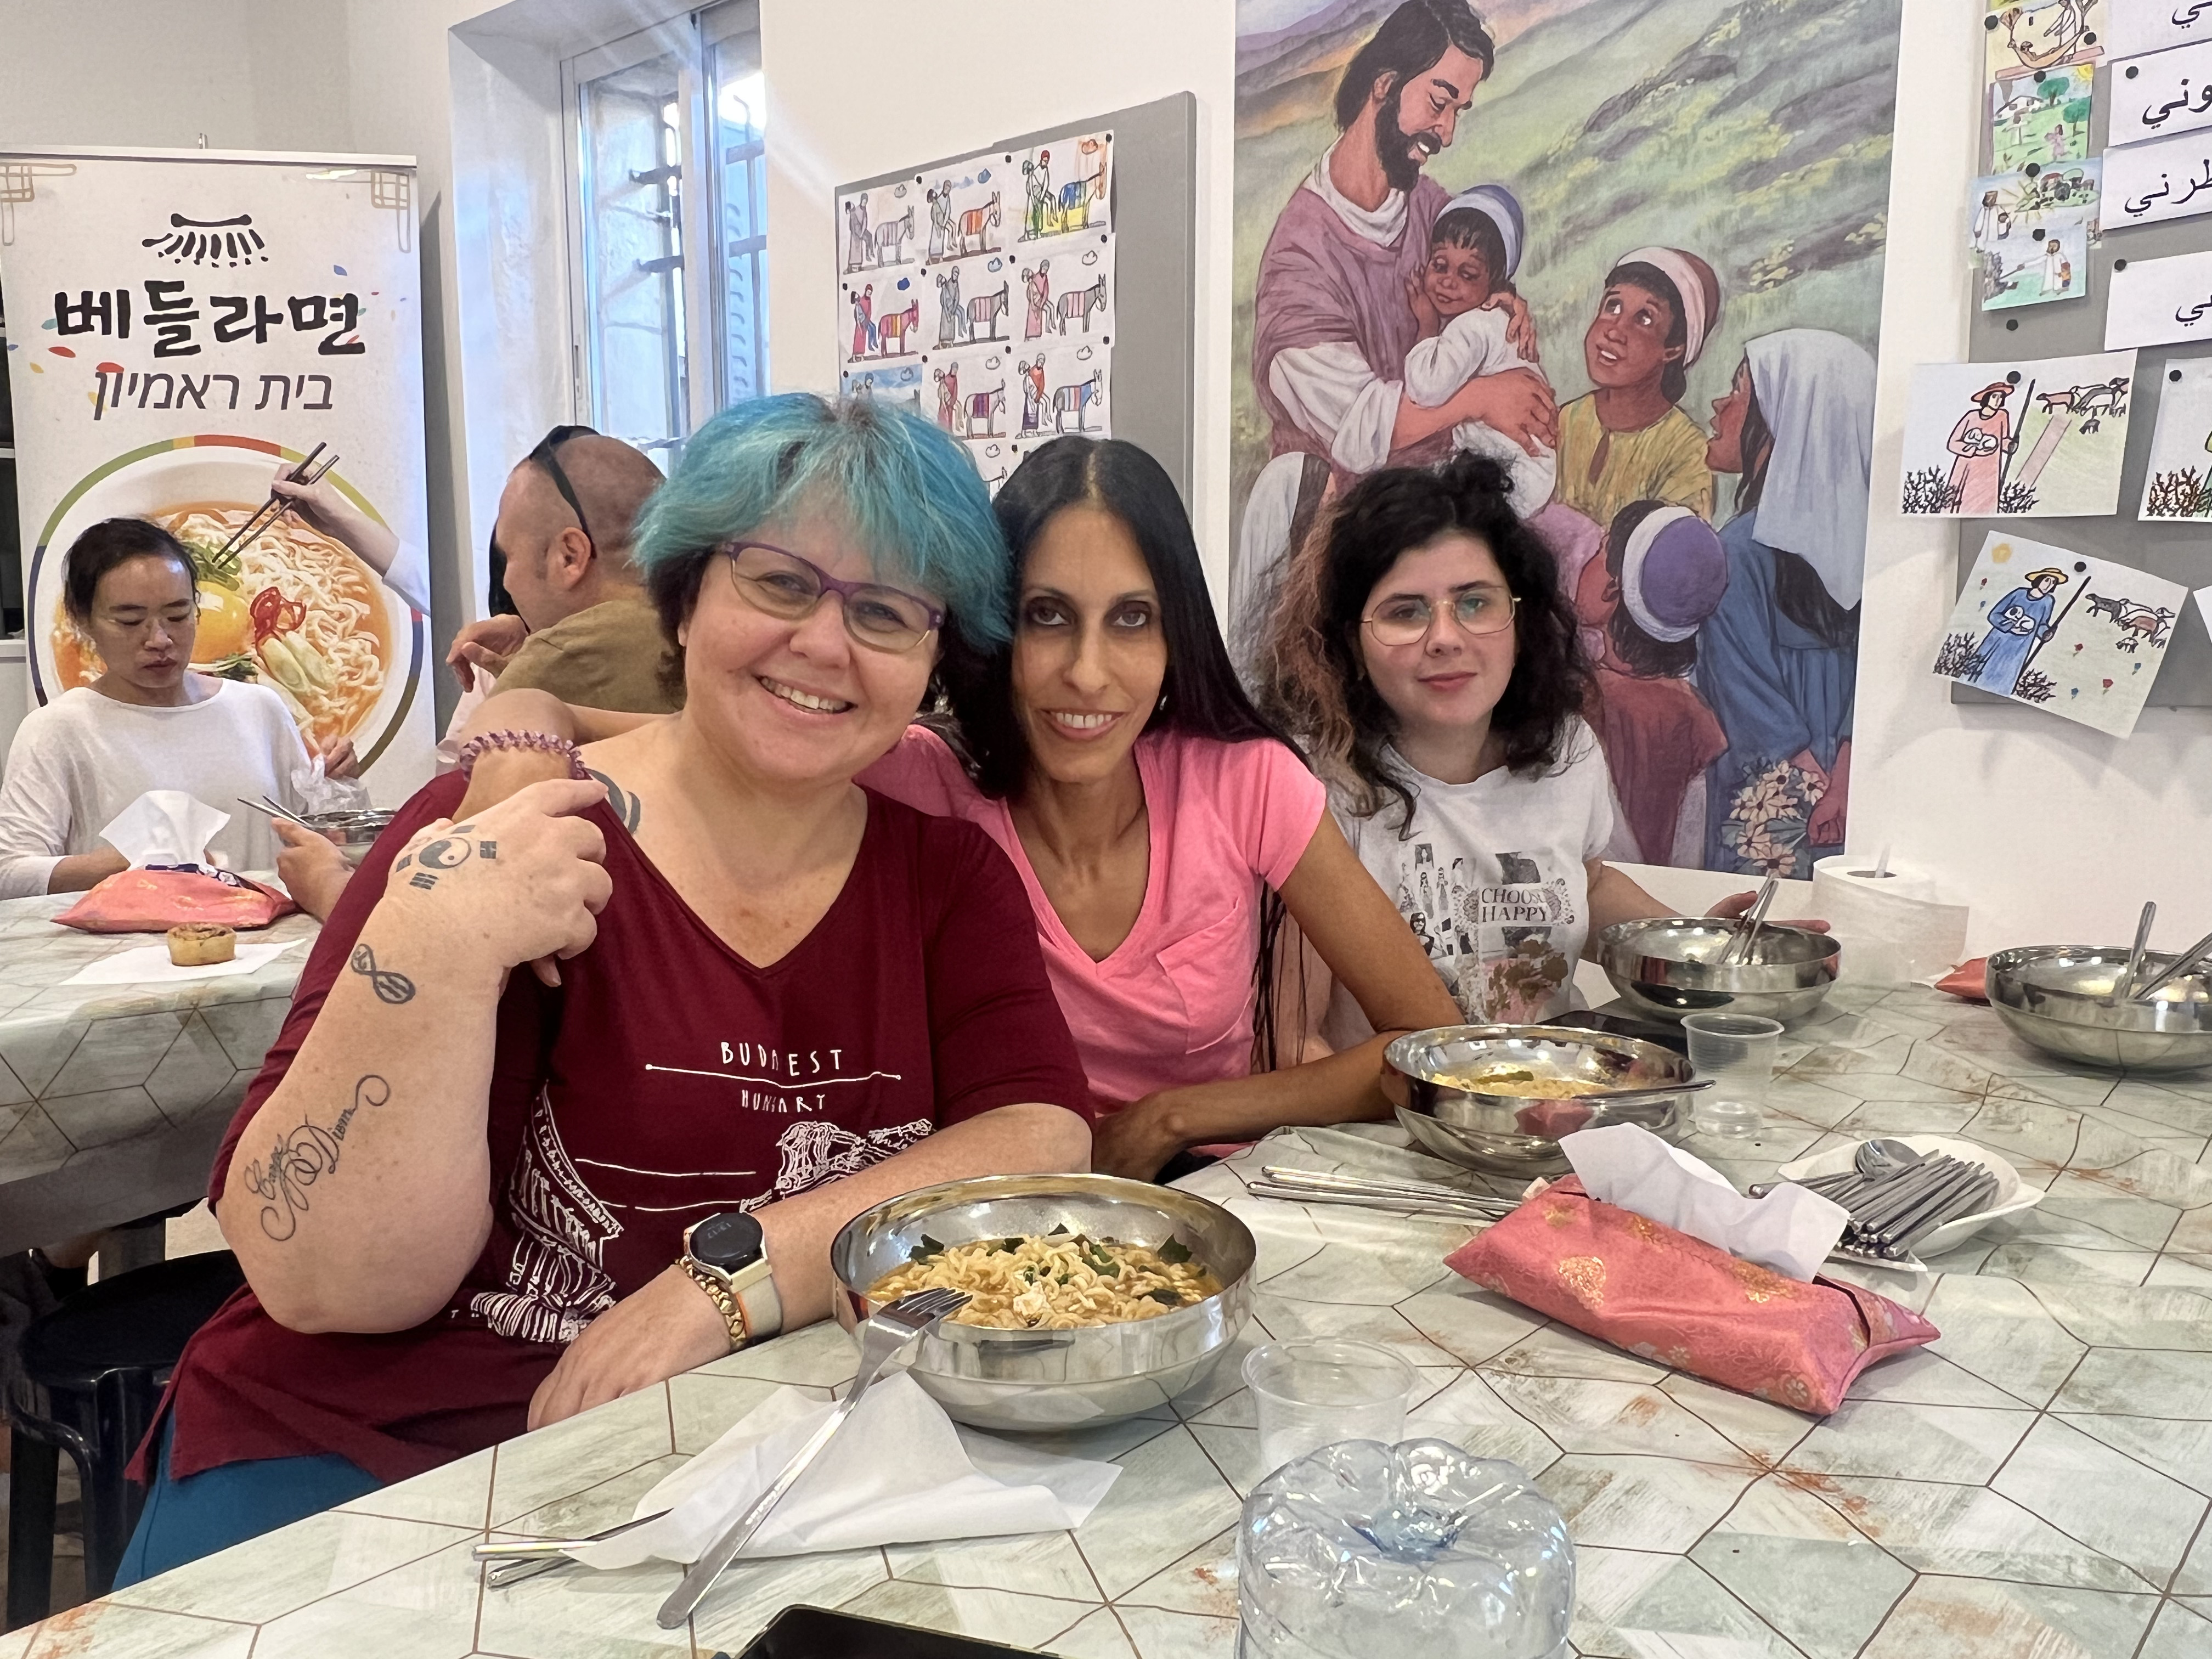 Rita made a visit to Bethel Ramyeon with her friend Hilla (middle) and daughter Oraya (right)